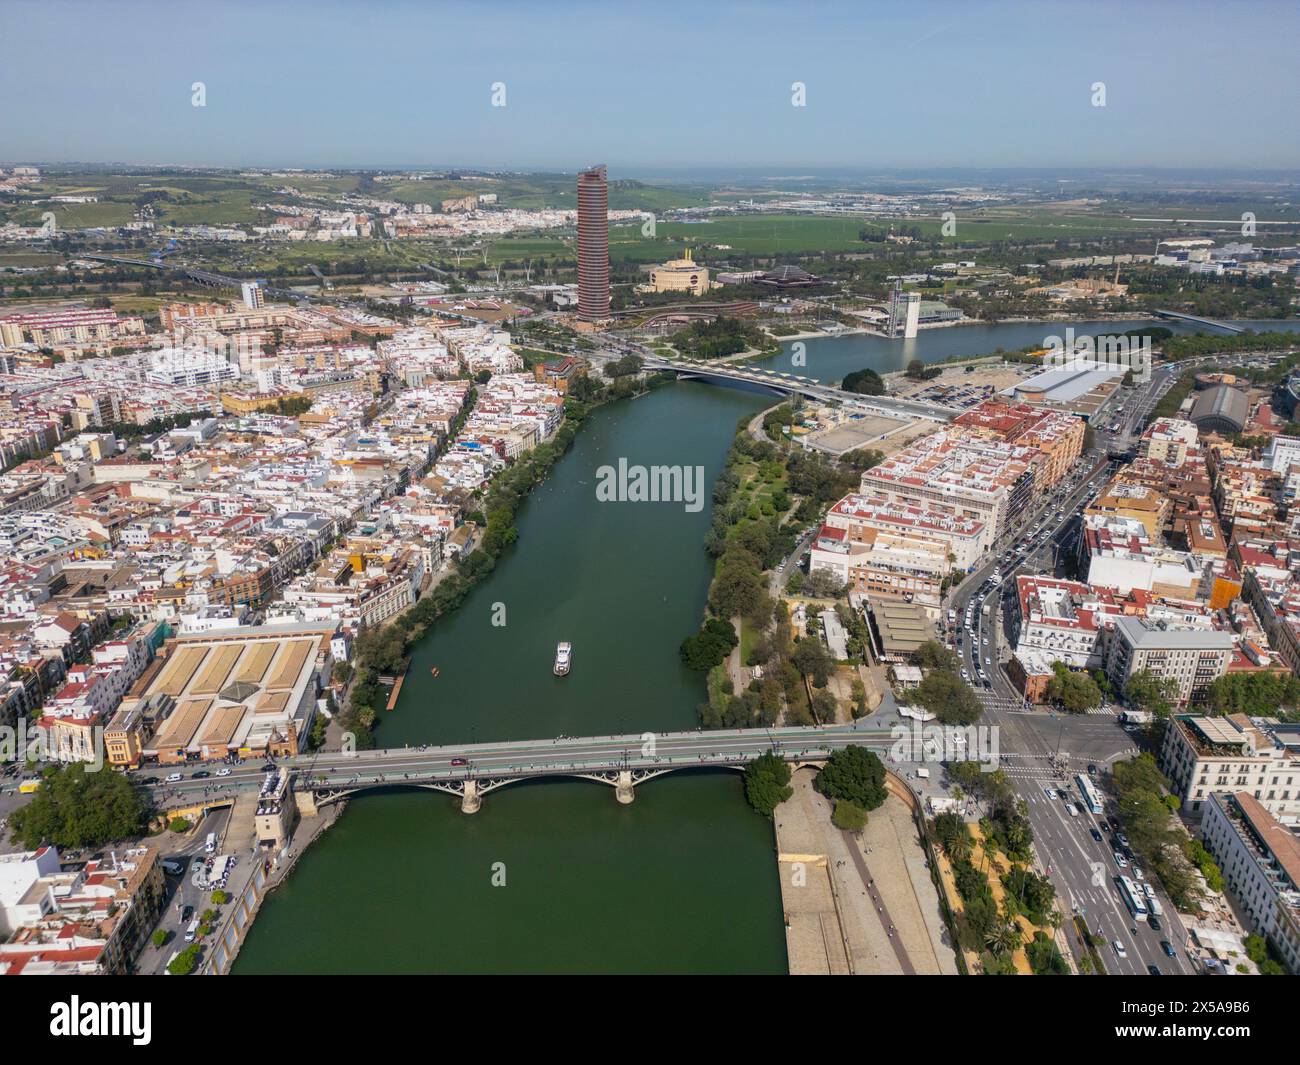 A scenic aerial photograph showcasing Seville's historic architecture, including the iconic cathedral and La Giralda tower by the Guadalquivir River, Stock Photo